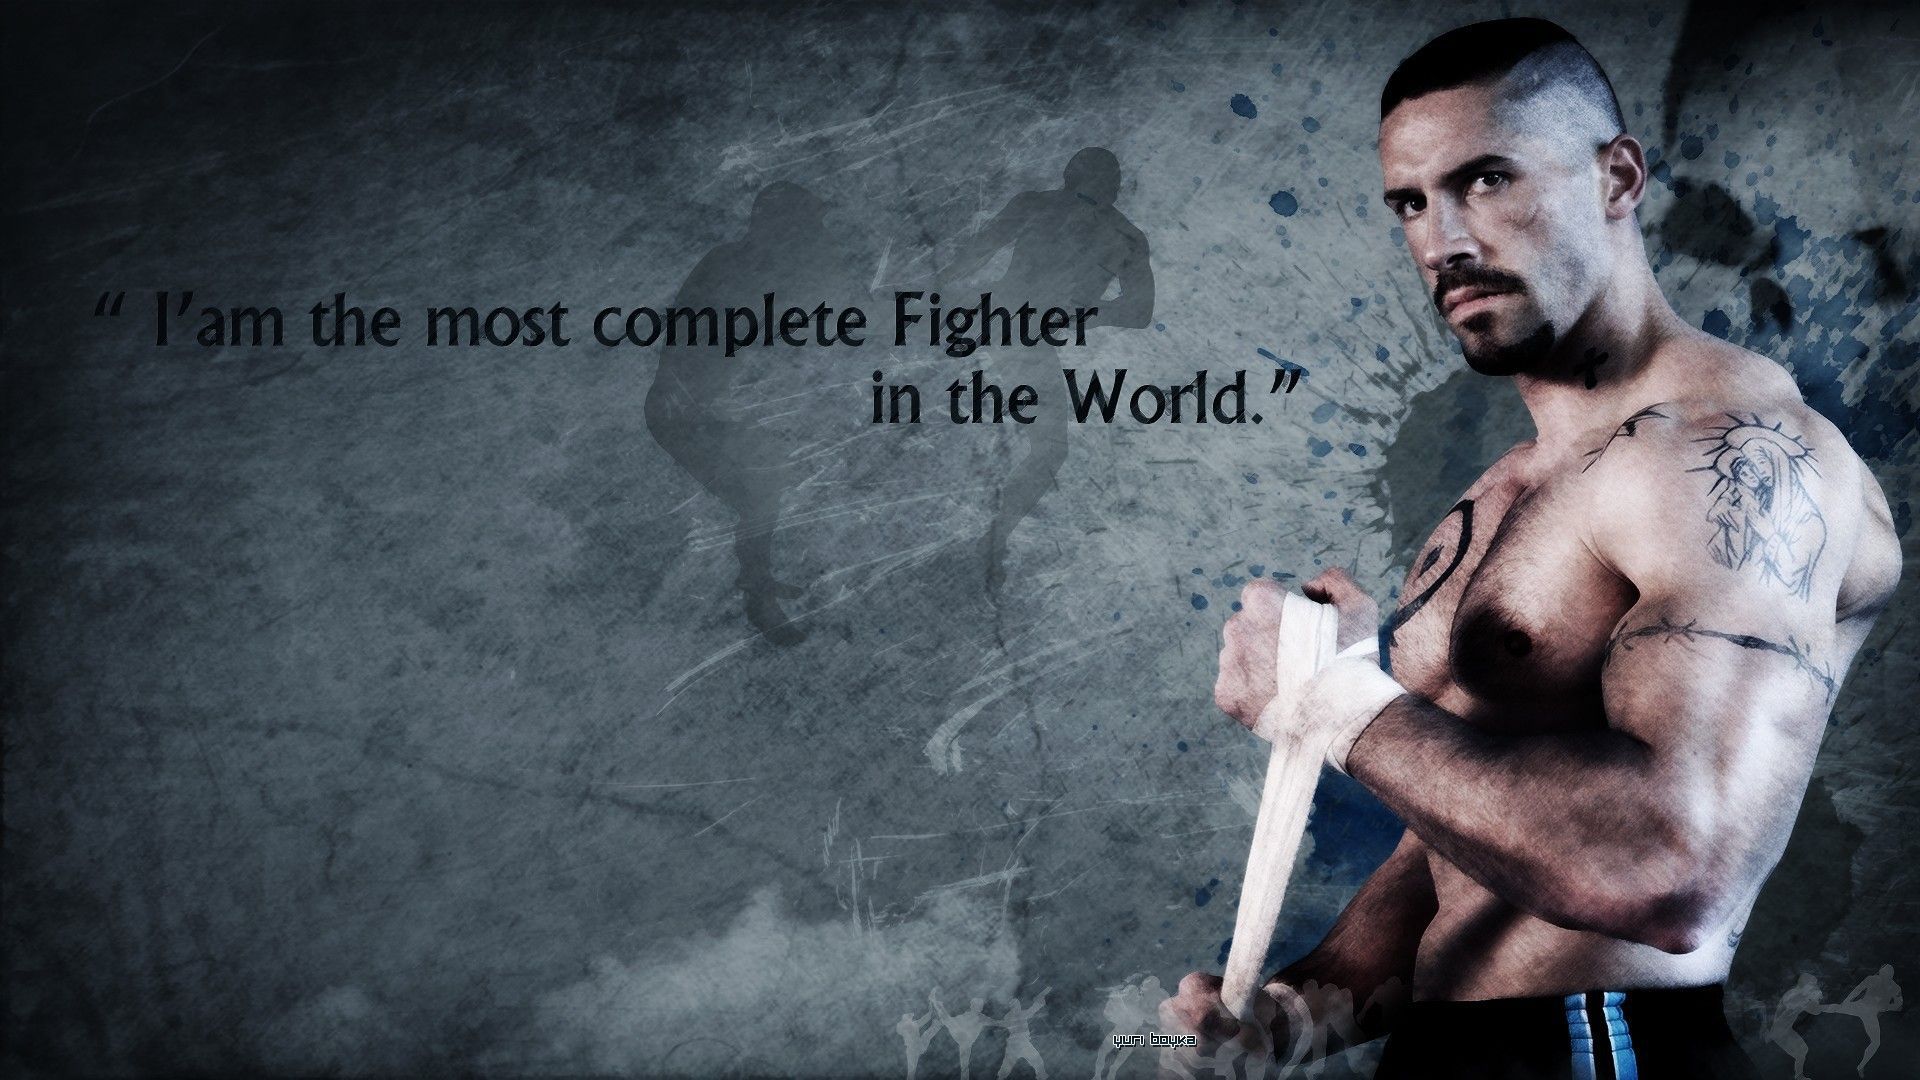 Scott Adkins as Boyka wallpapers and images - wallpapers, pictures